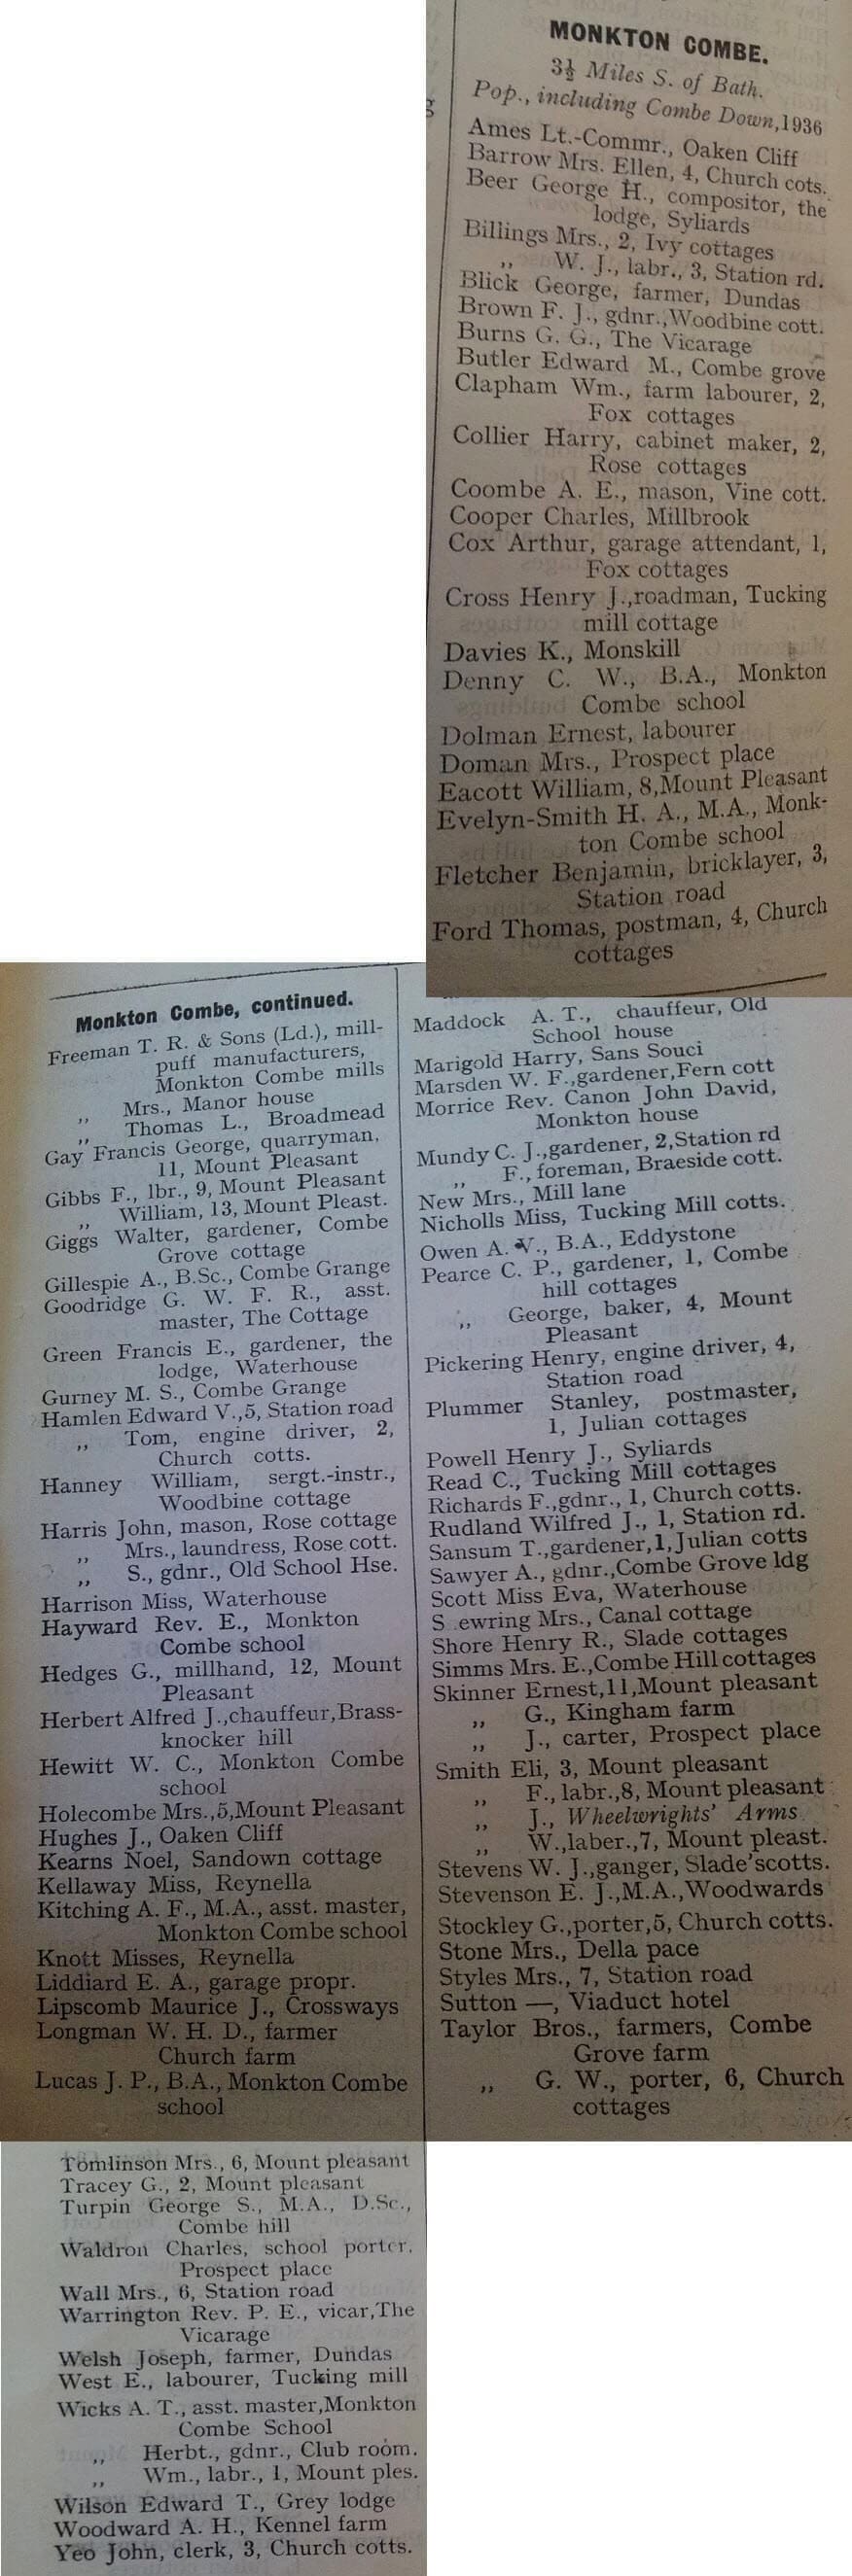 1927 Post Office Directory for Monkton Combe